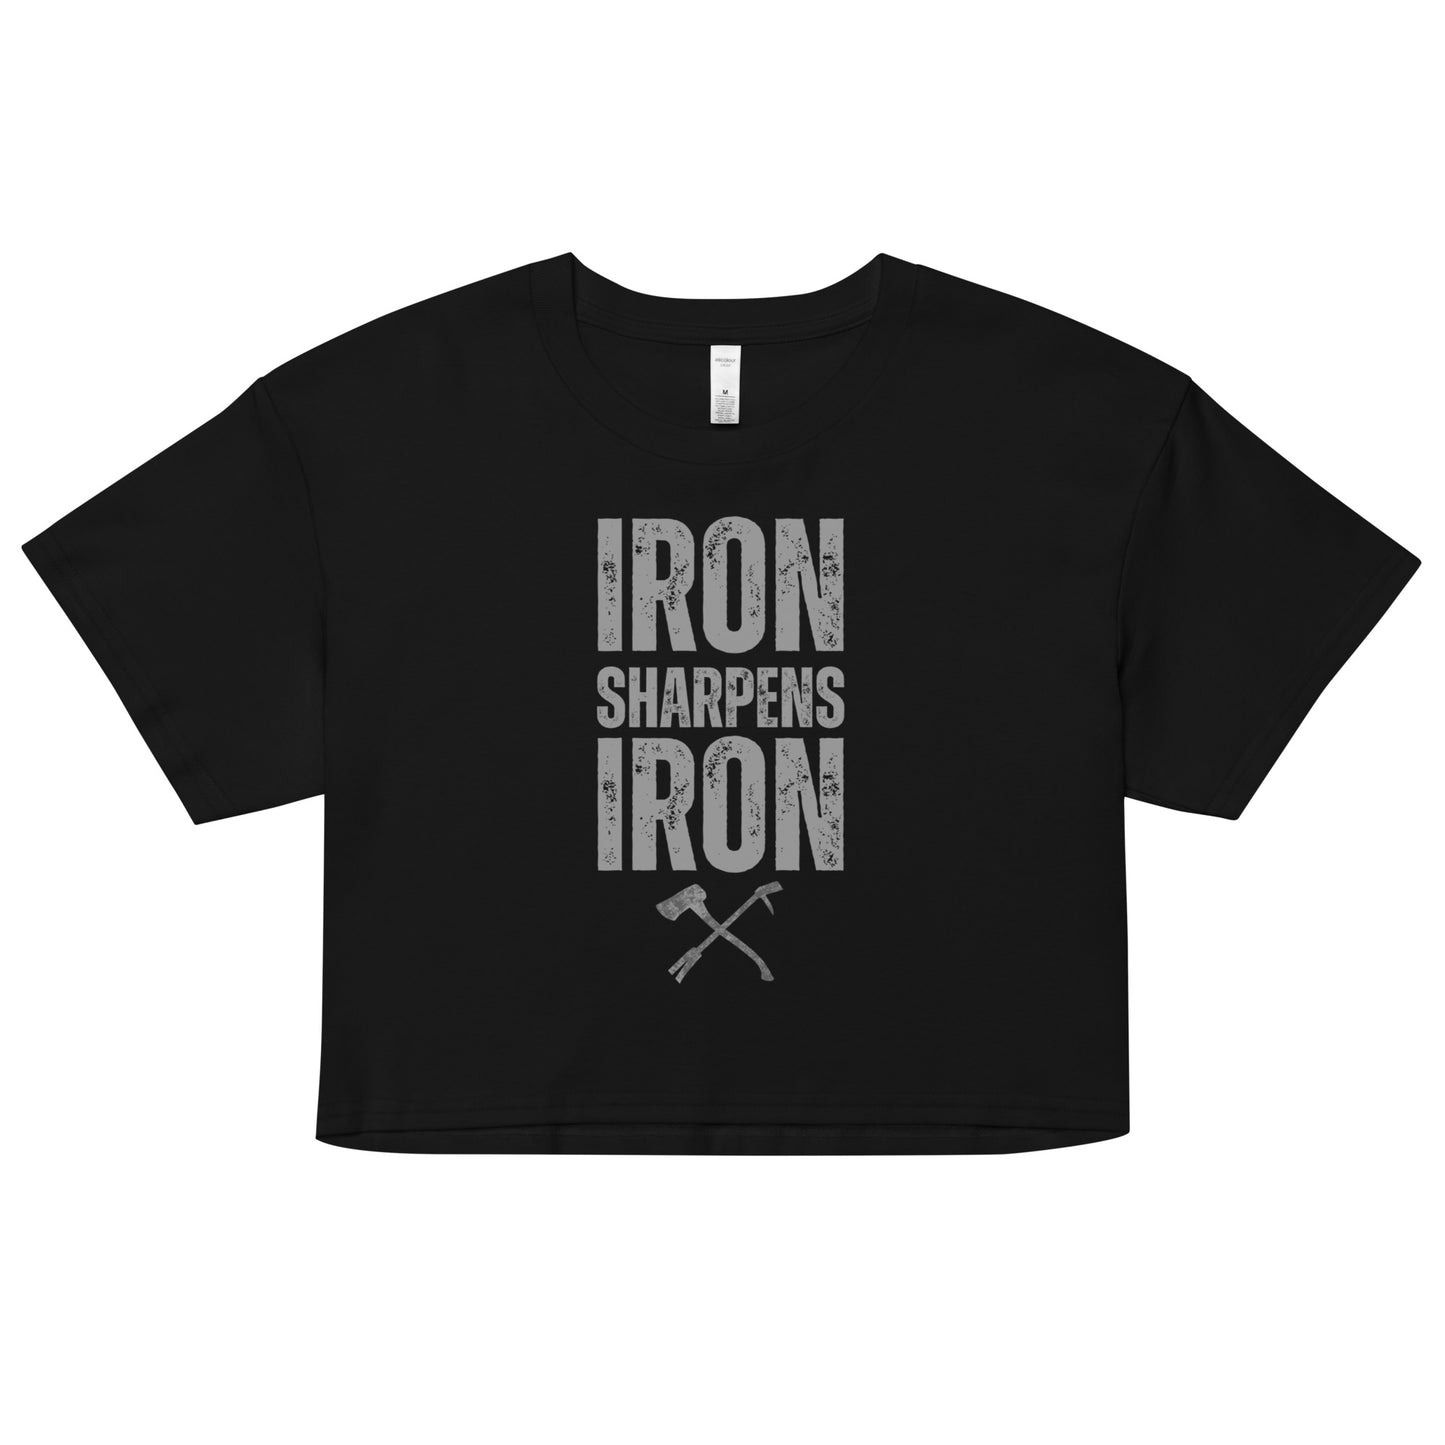 Iron Sharpens Iron Proverbs 27:17 Women's Crop top with a set of irons - Black